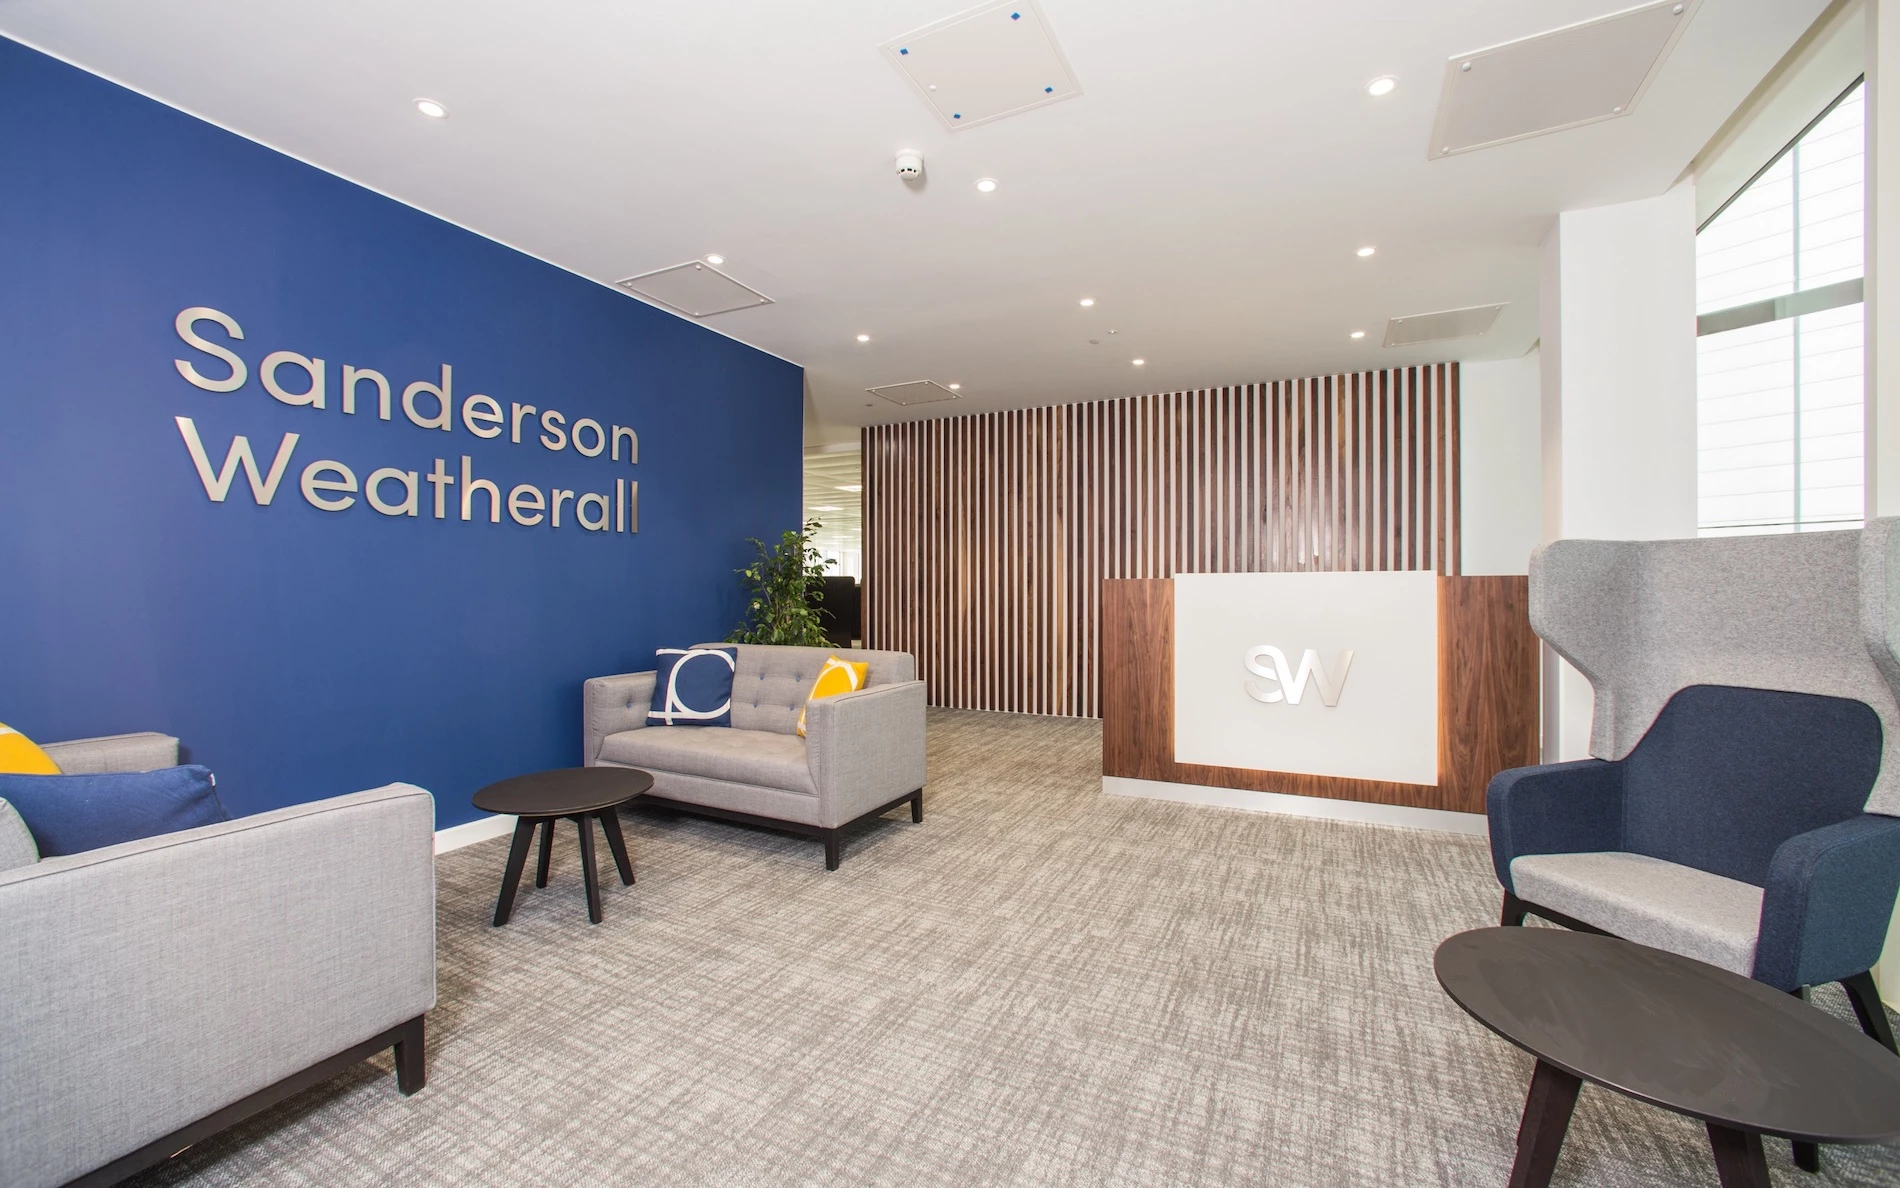 Sanderson Weatherall’s new office at Central Square